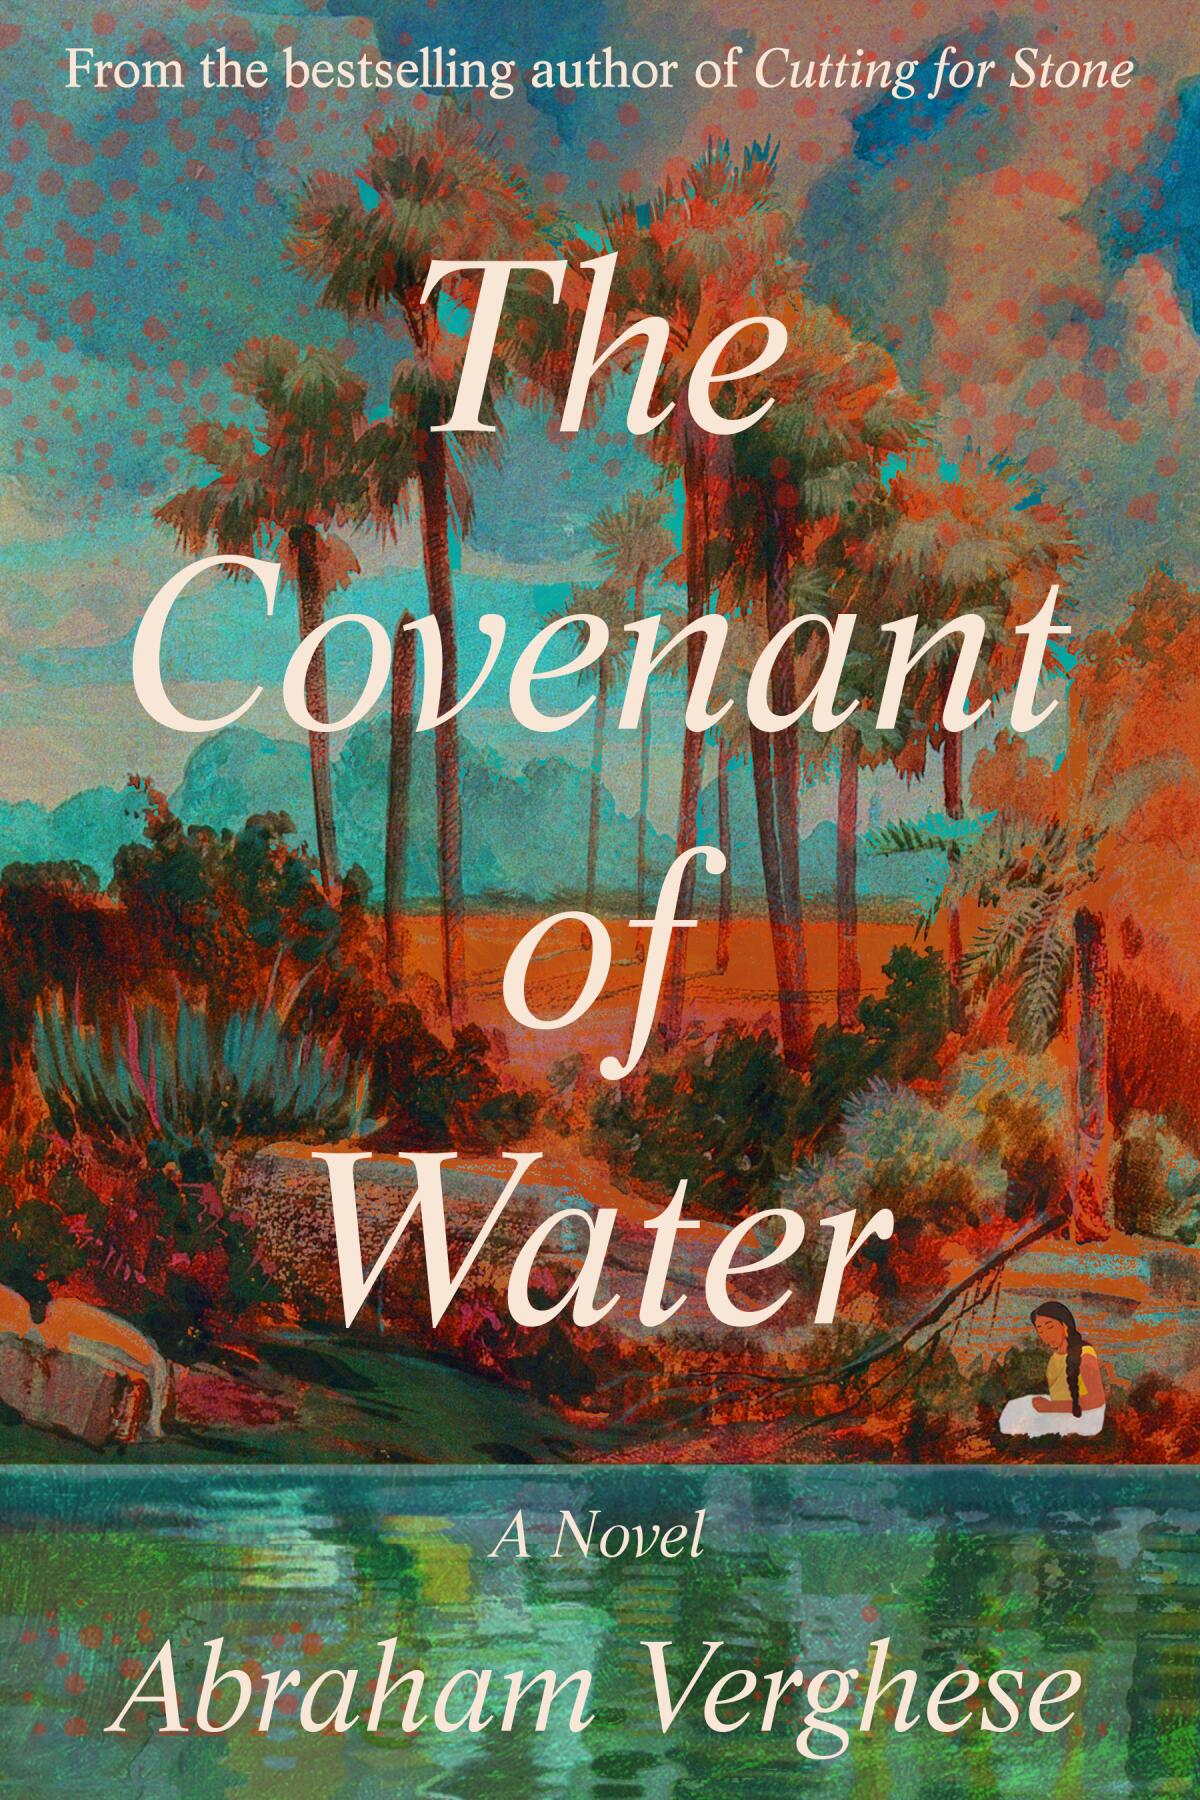 The cover of 'The Covenant of Water' by Abraham Verghese